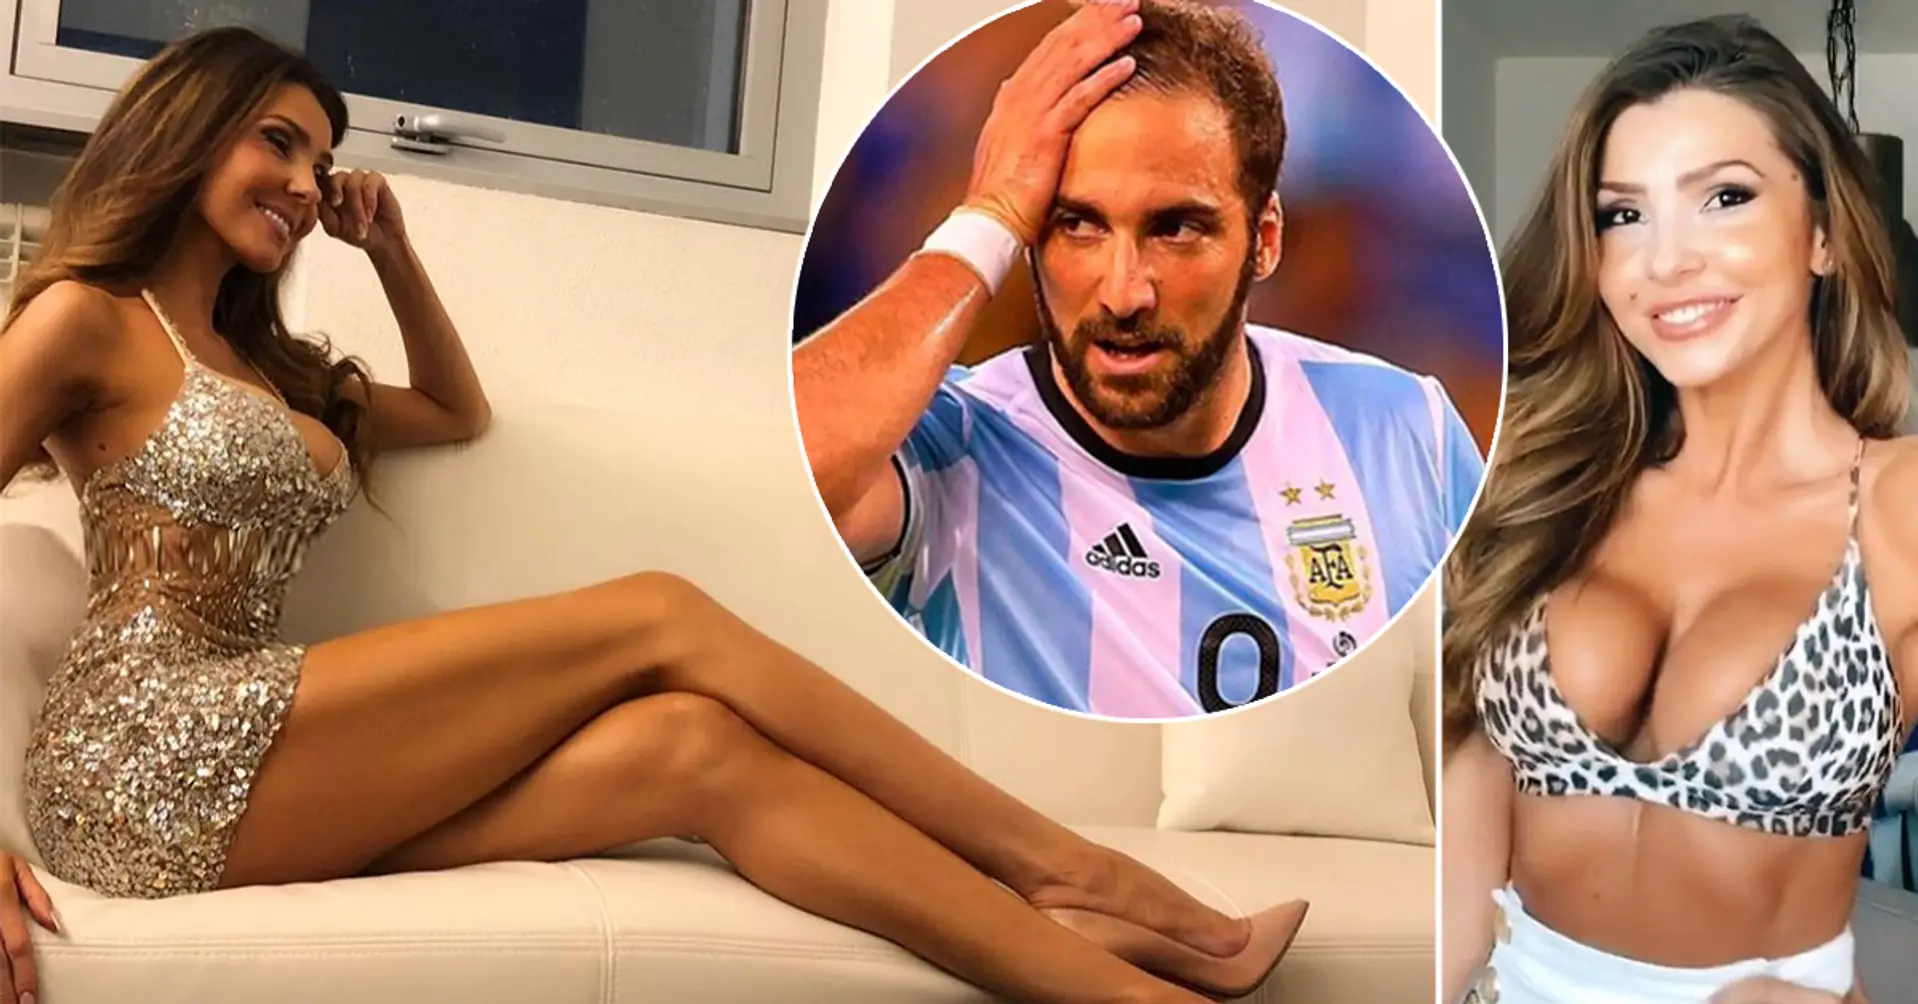 'He has a passion for dirty women': Higuain's ex-girlfriend reveals details of their bizarre relationship